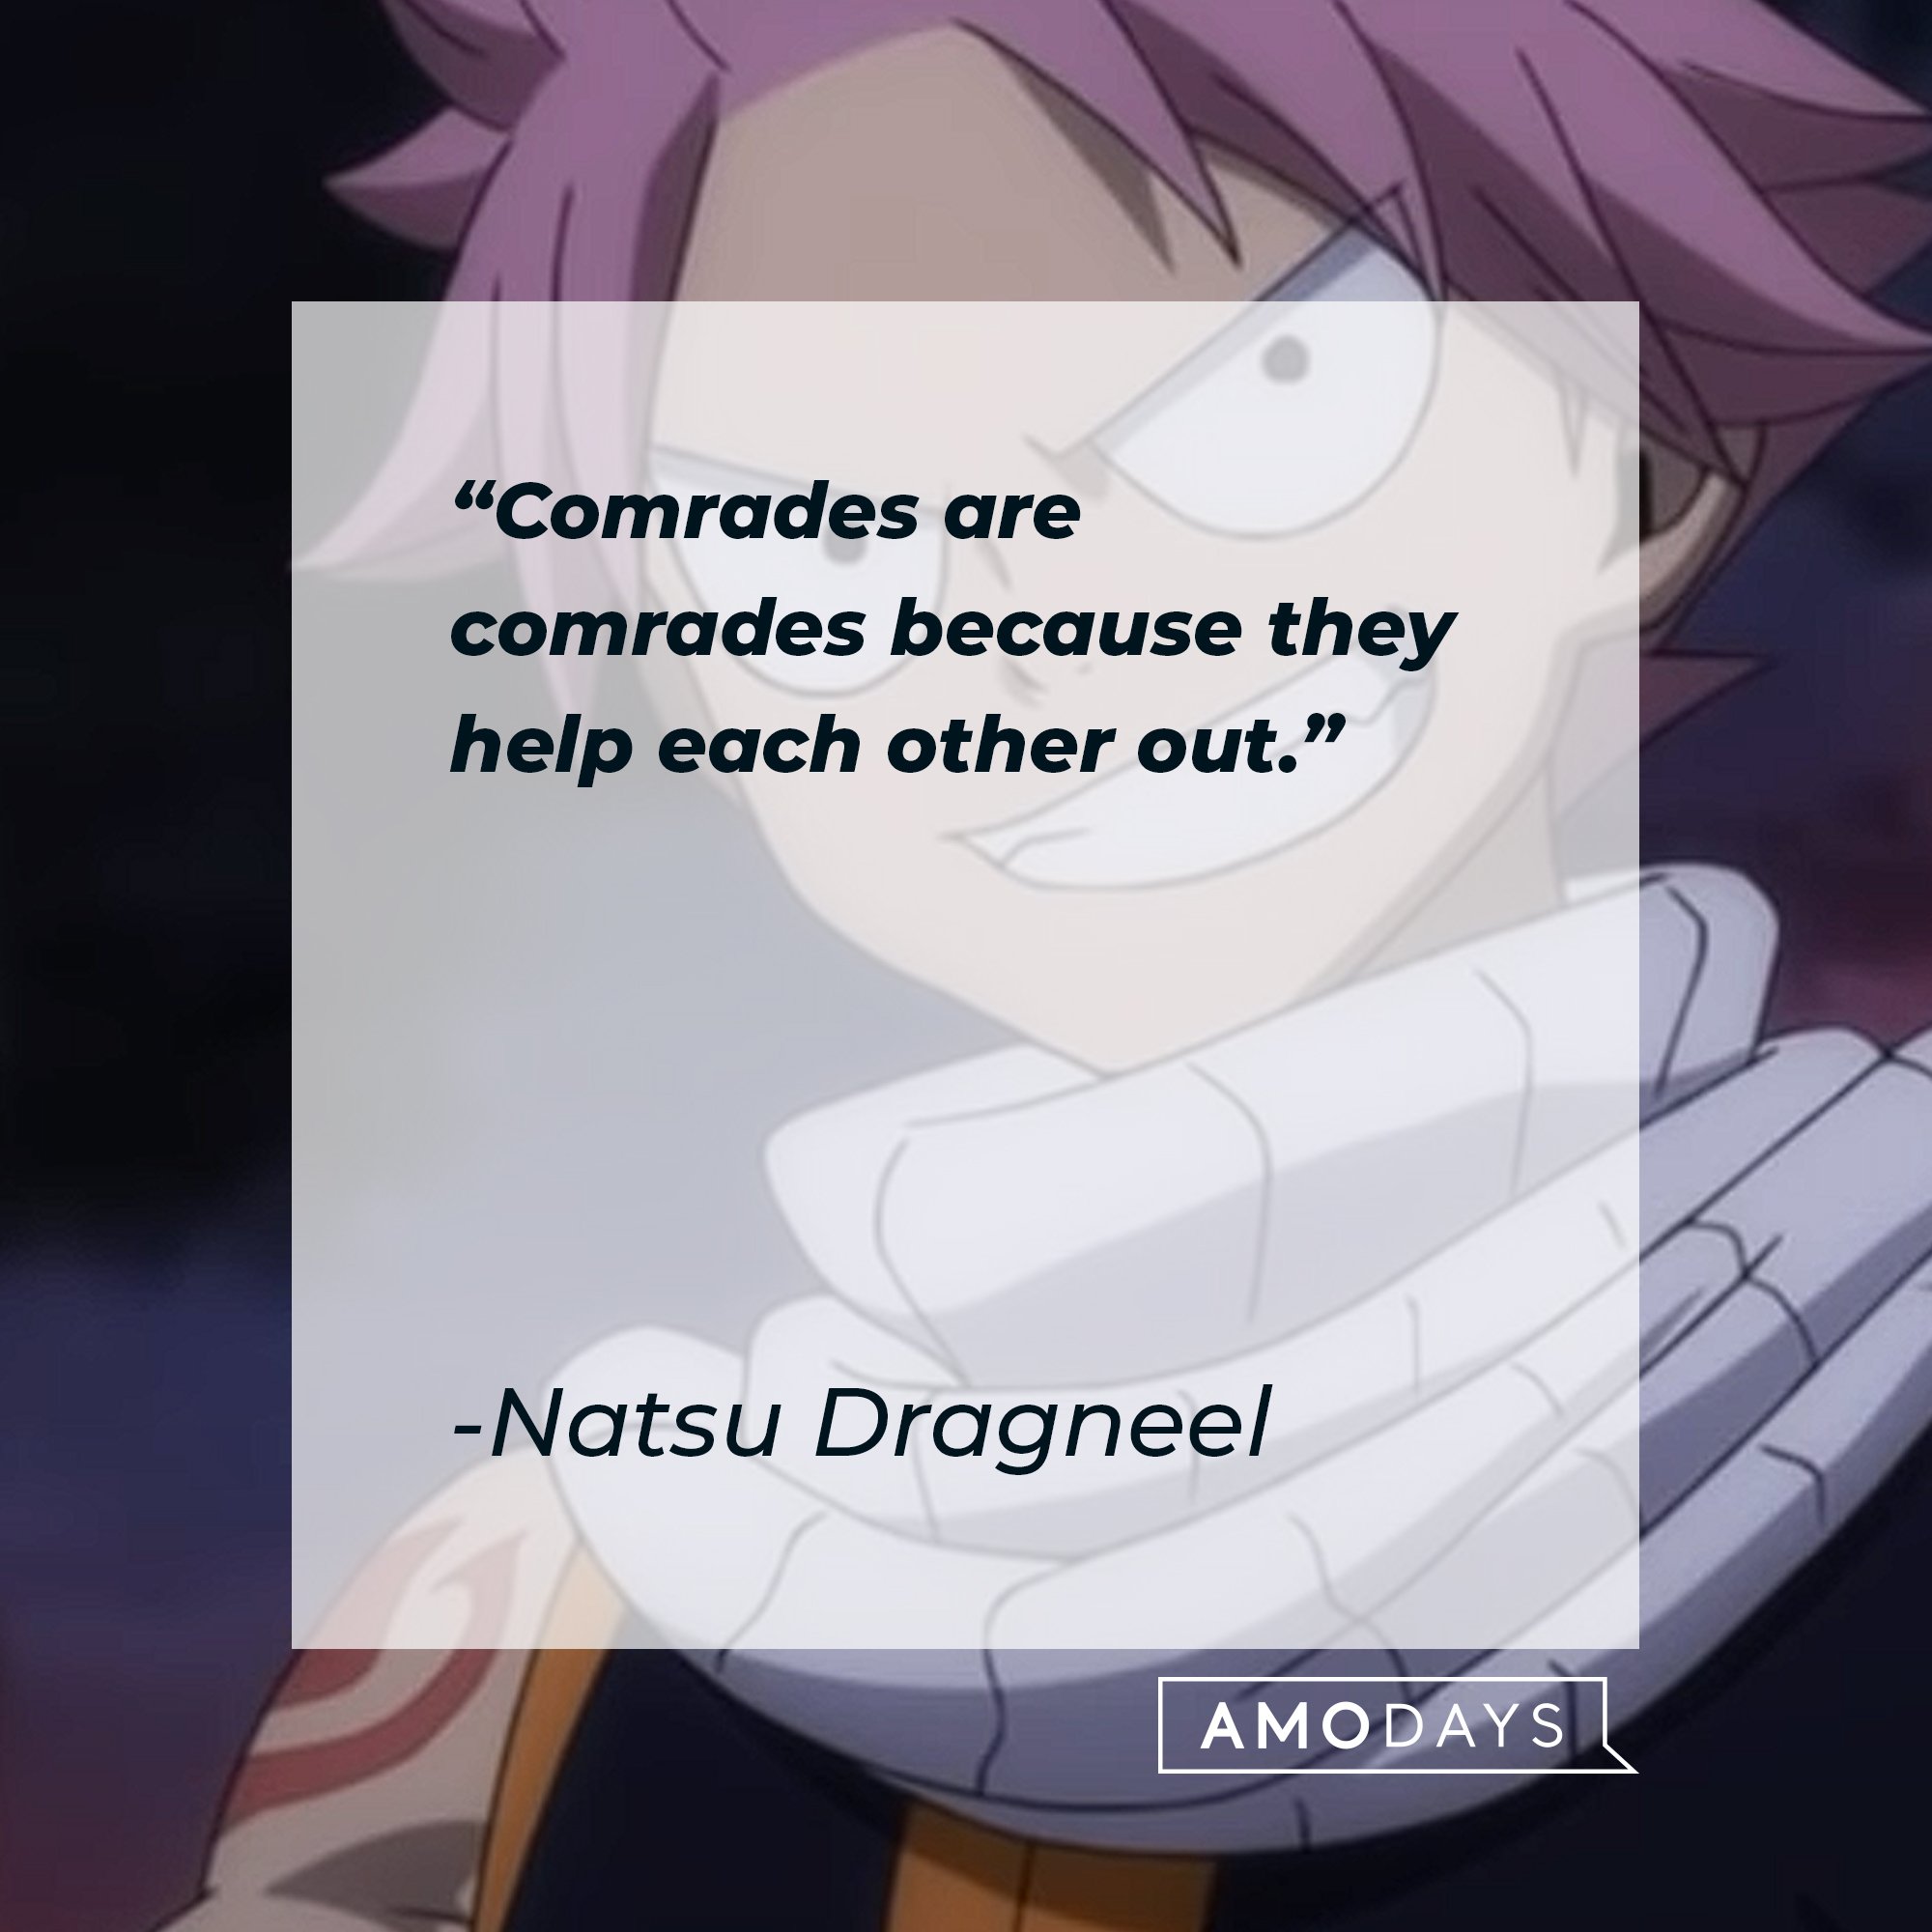 Natsu Dragneel’s quote: "Comrades are comrades because they help each other out."  | Image: AmoDays